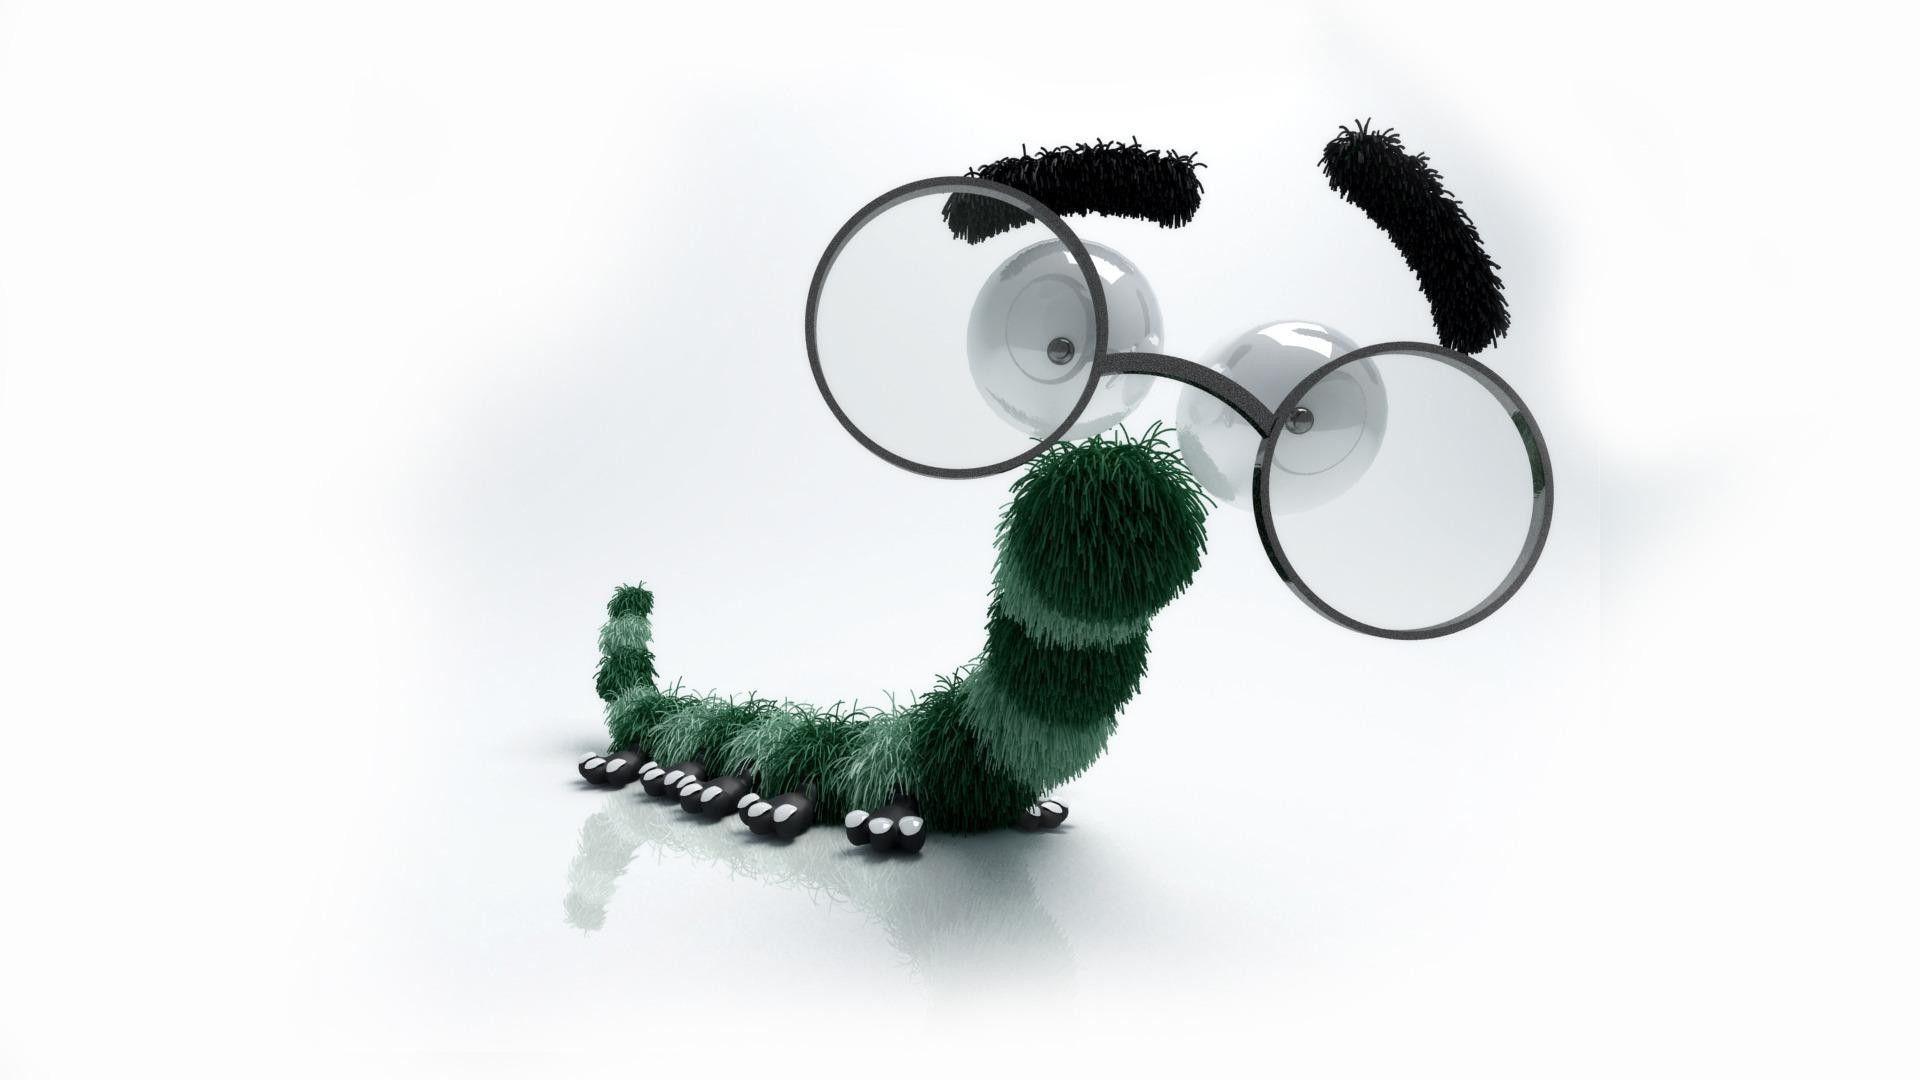 Centipede in glasses wallpaper and image, picture